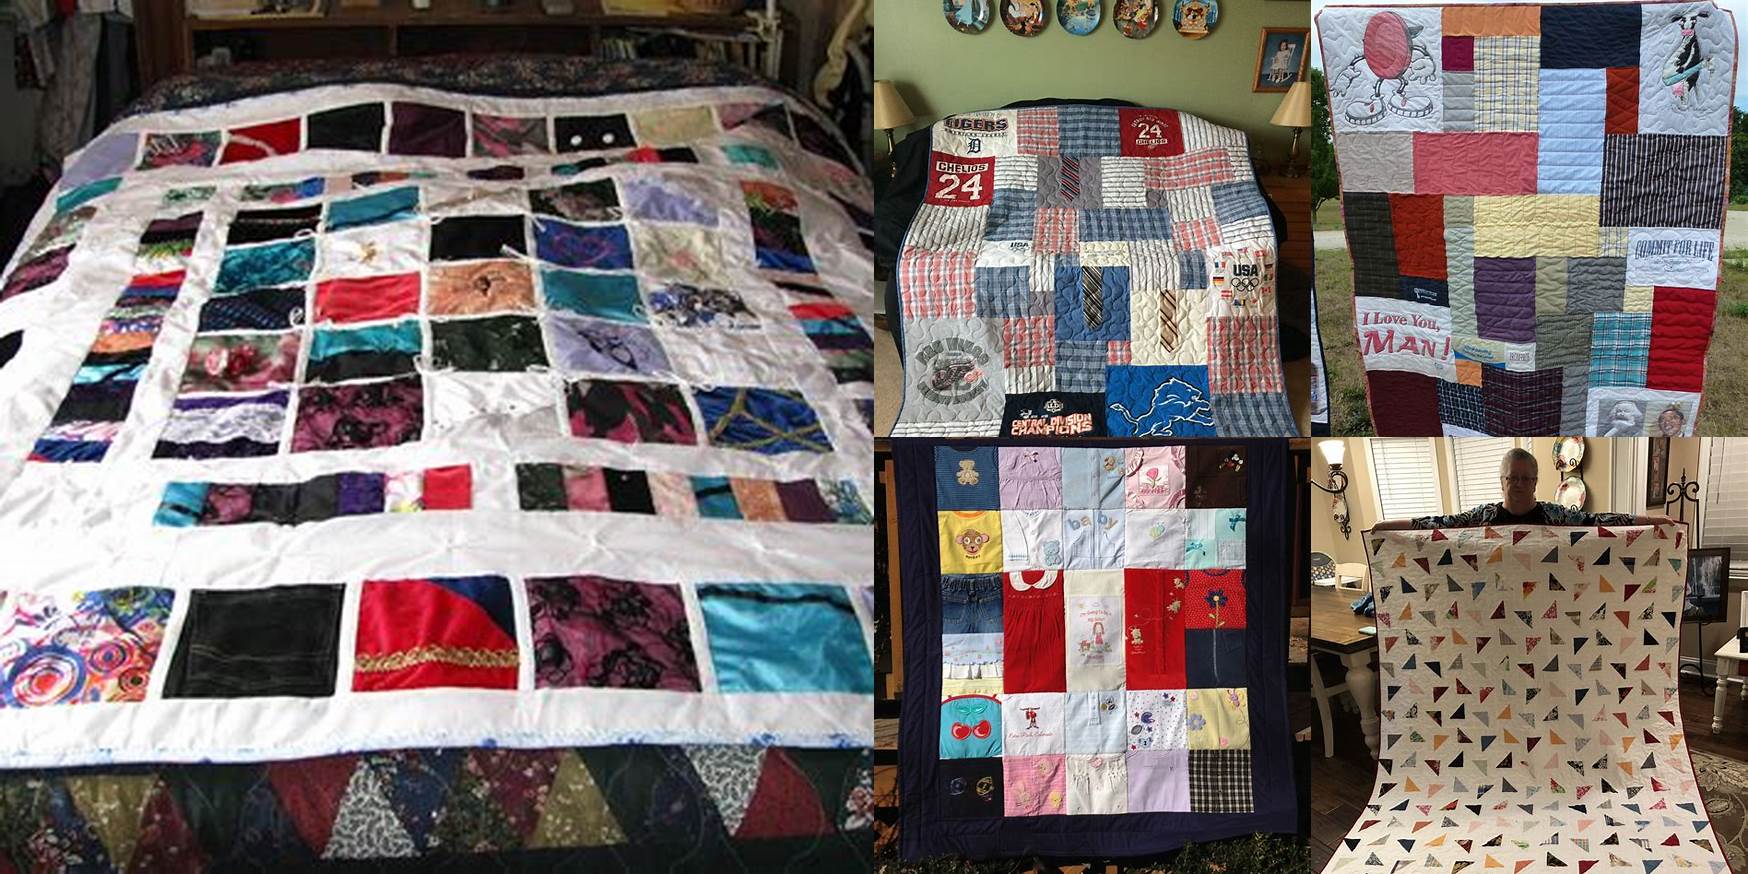 How To Make A Memorial Quilt From Clothes